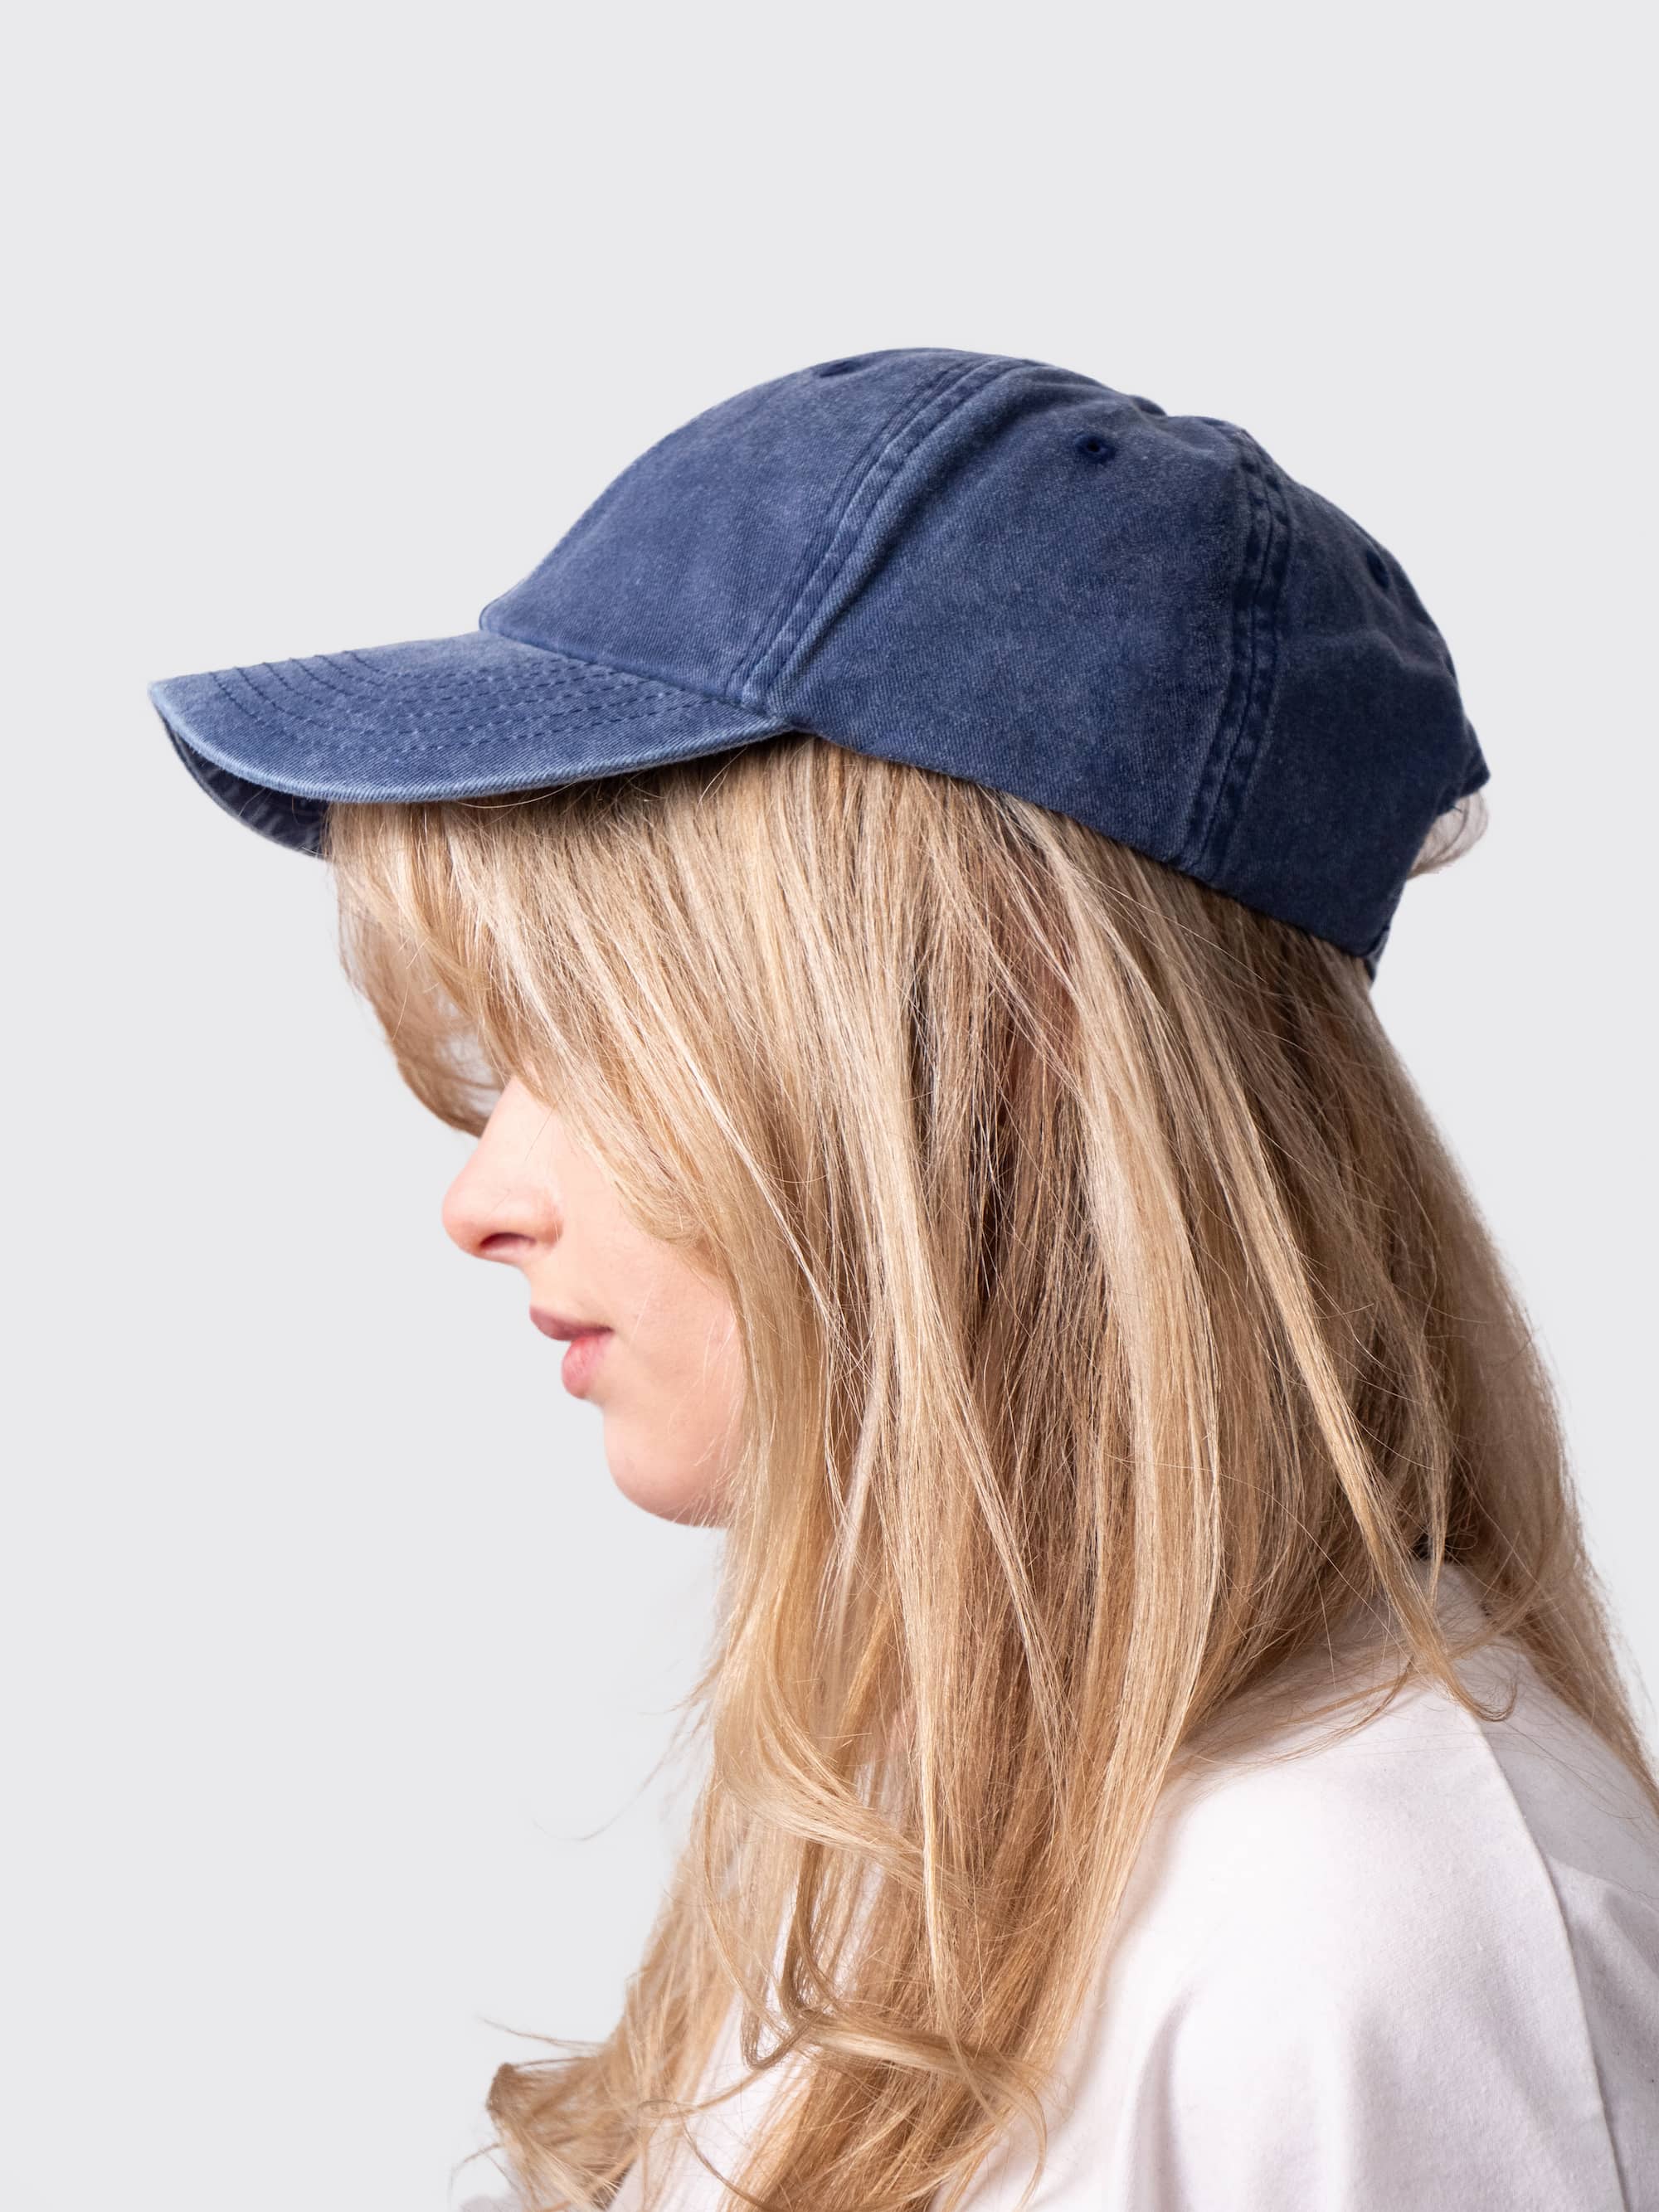 Denim vintage cap, with embroidered The Queen's crest